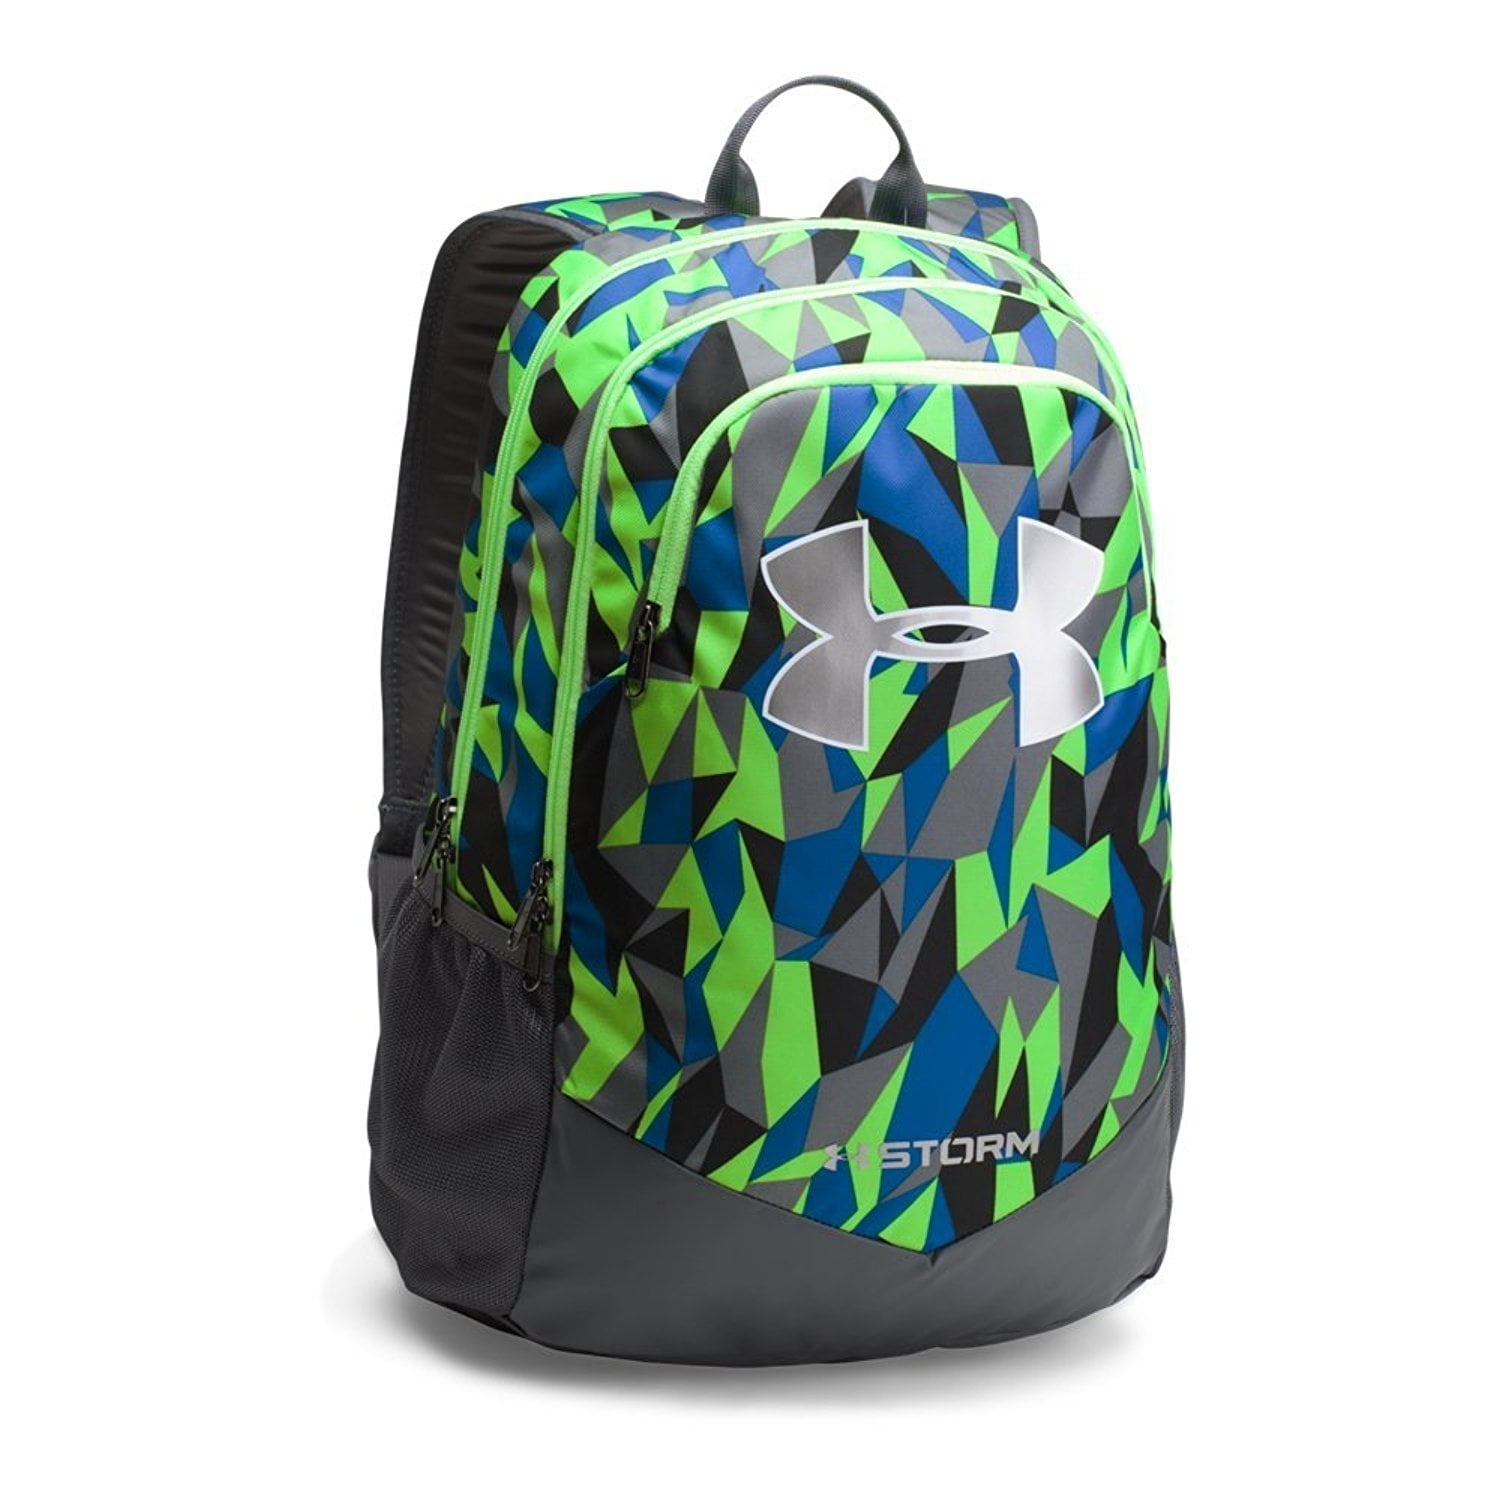 under armour boy's storm scrimmage backpack